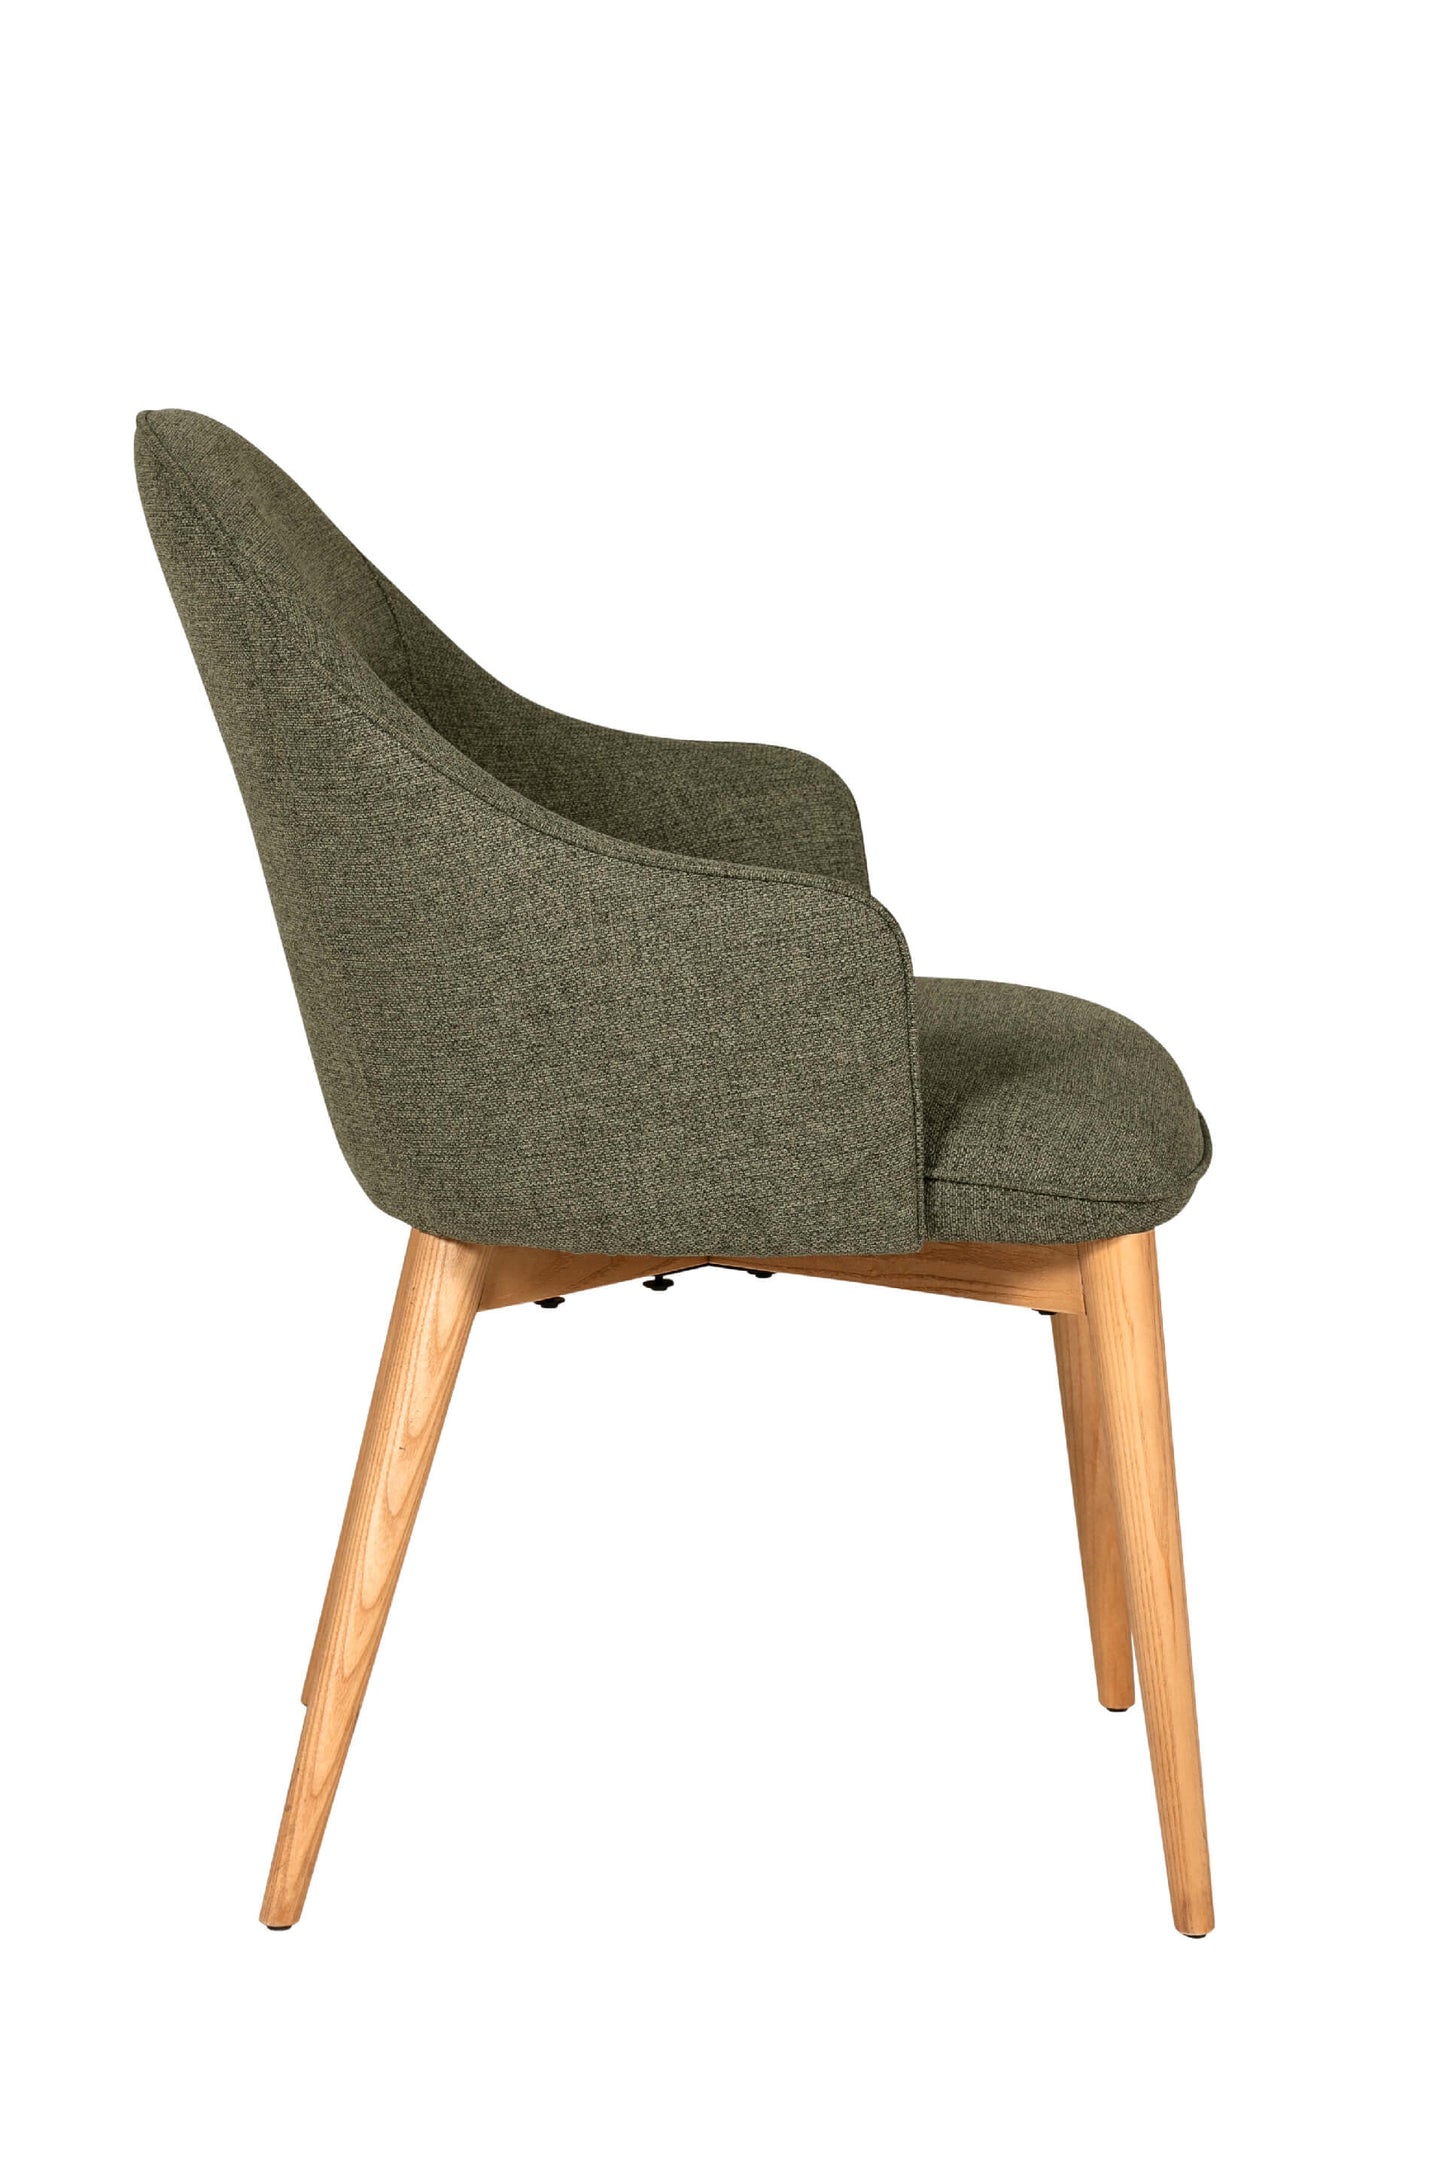 Evalyn Dining Chair - Green